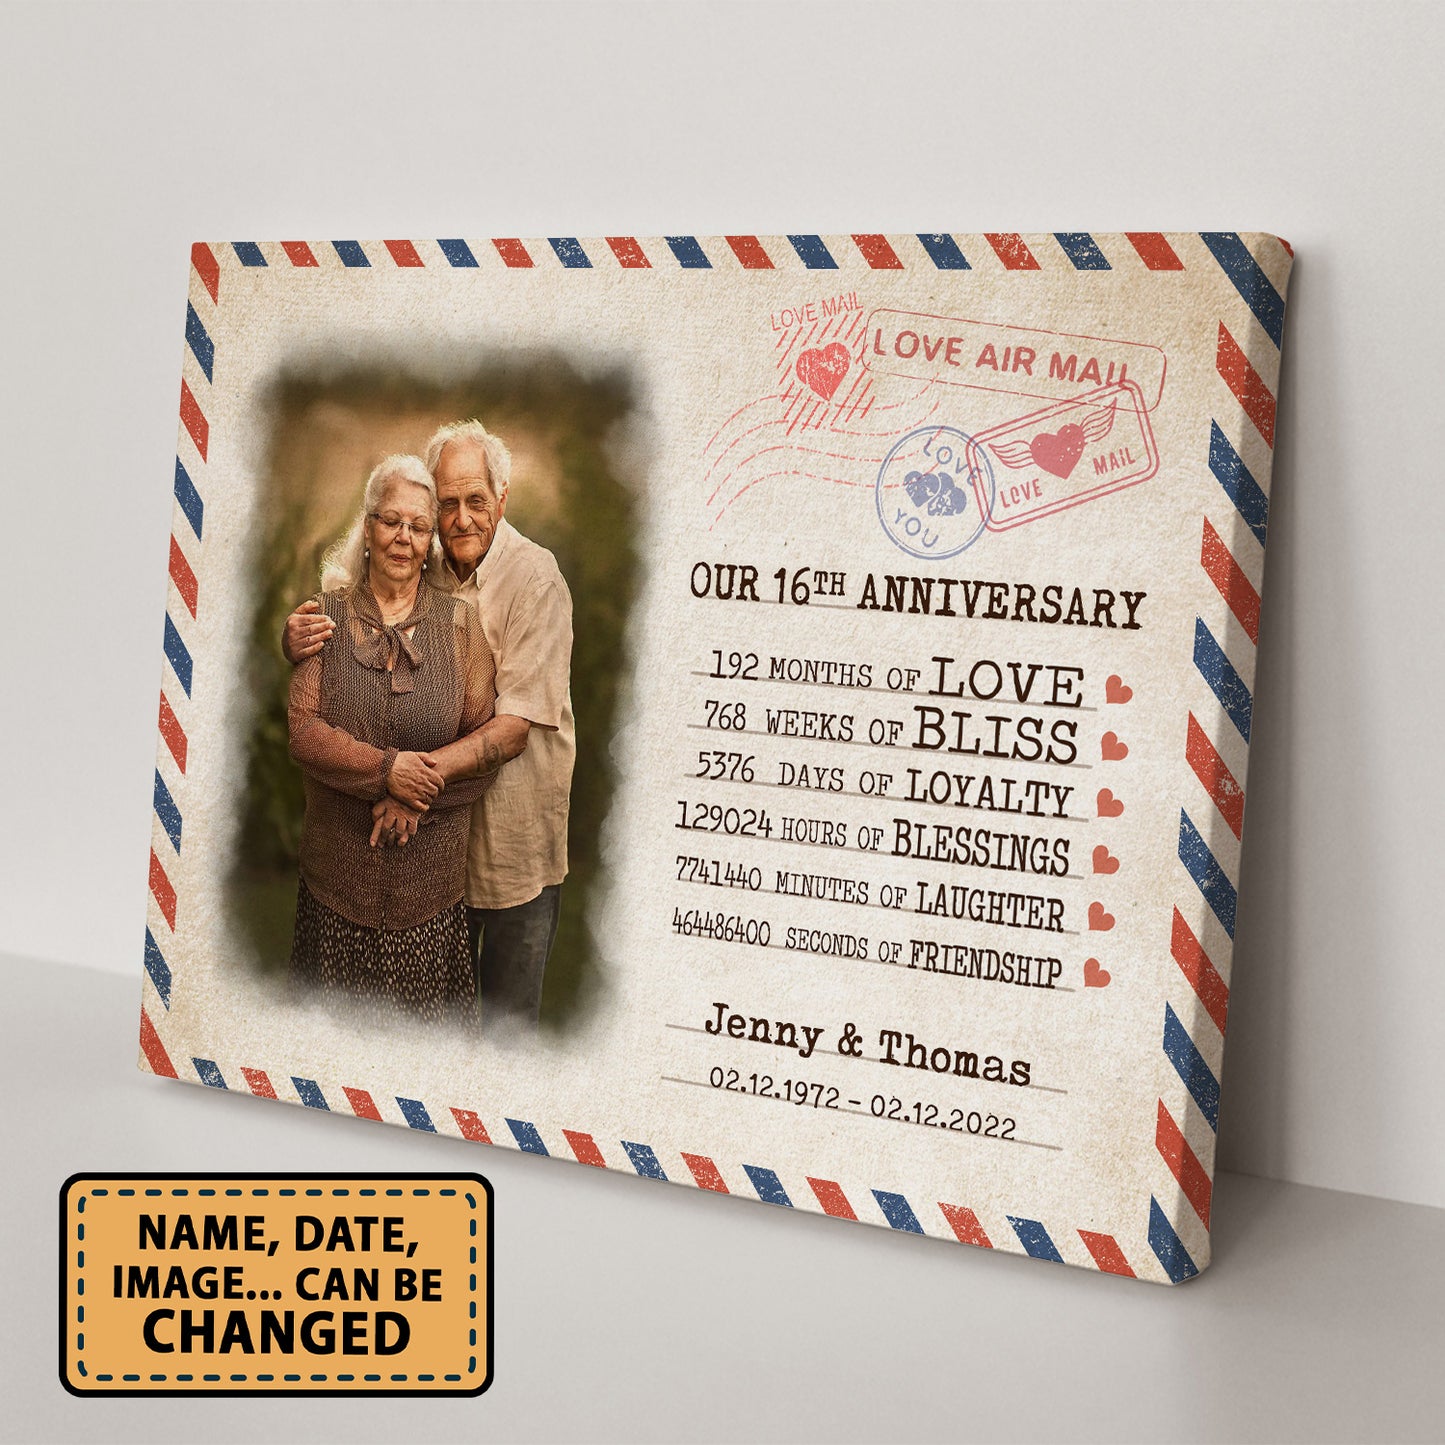 Our 16th Anniversary Letter Valentine Gift Personalized Canvas